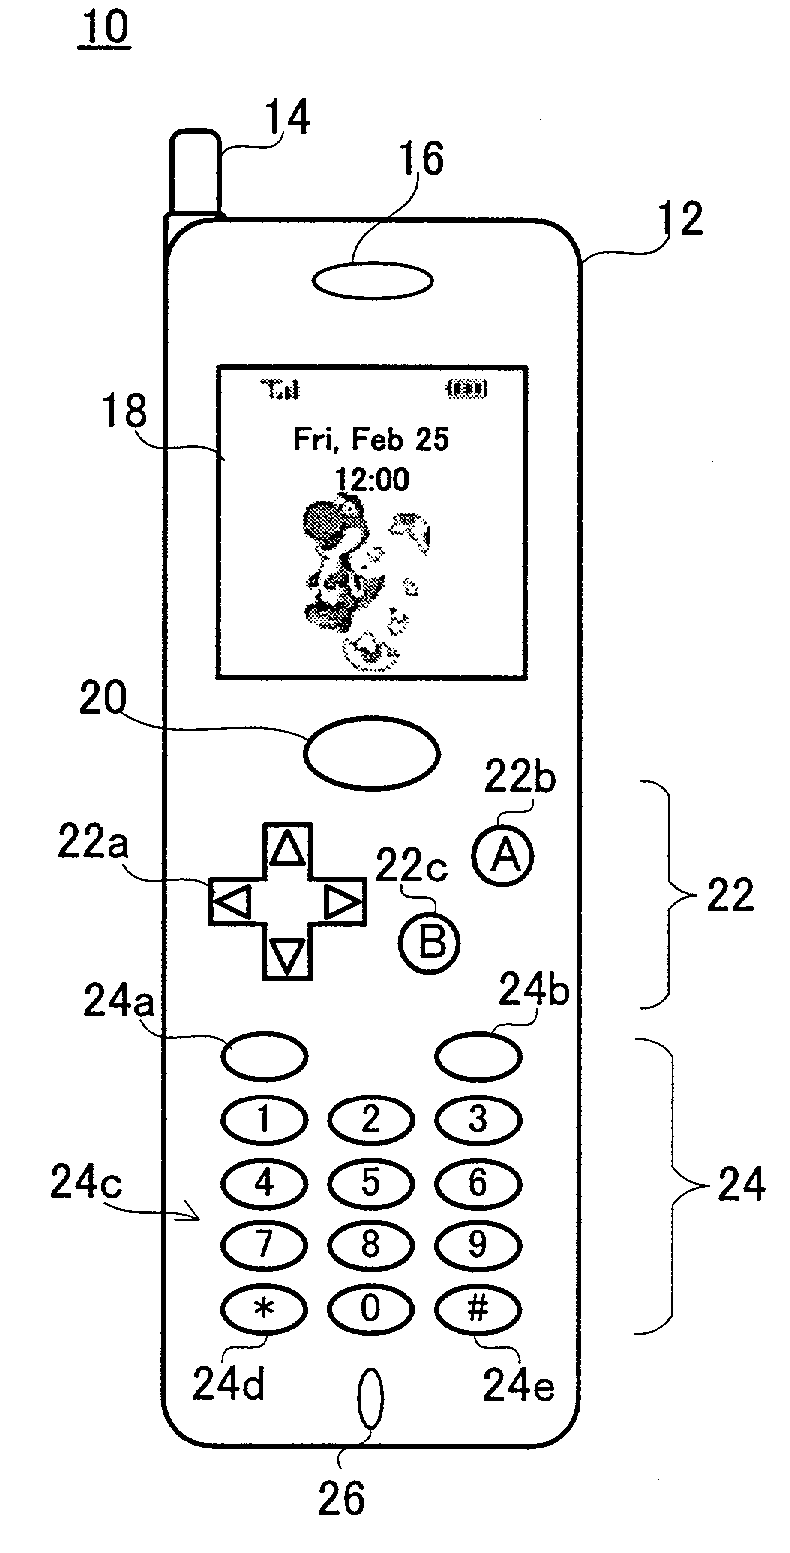 Nintendo patented a gaming cell phone in 2000